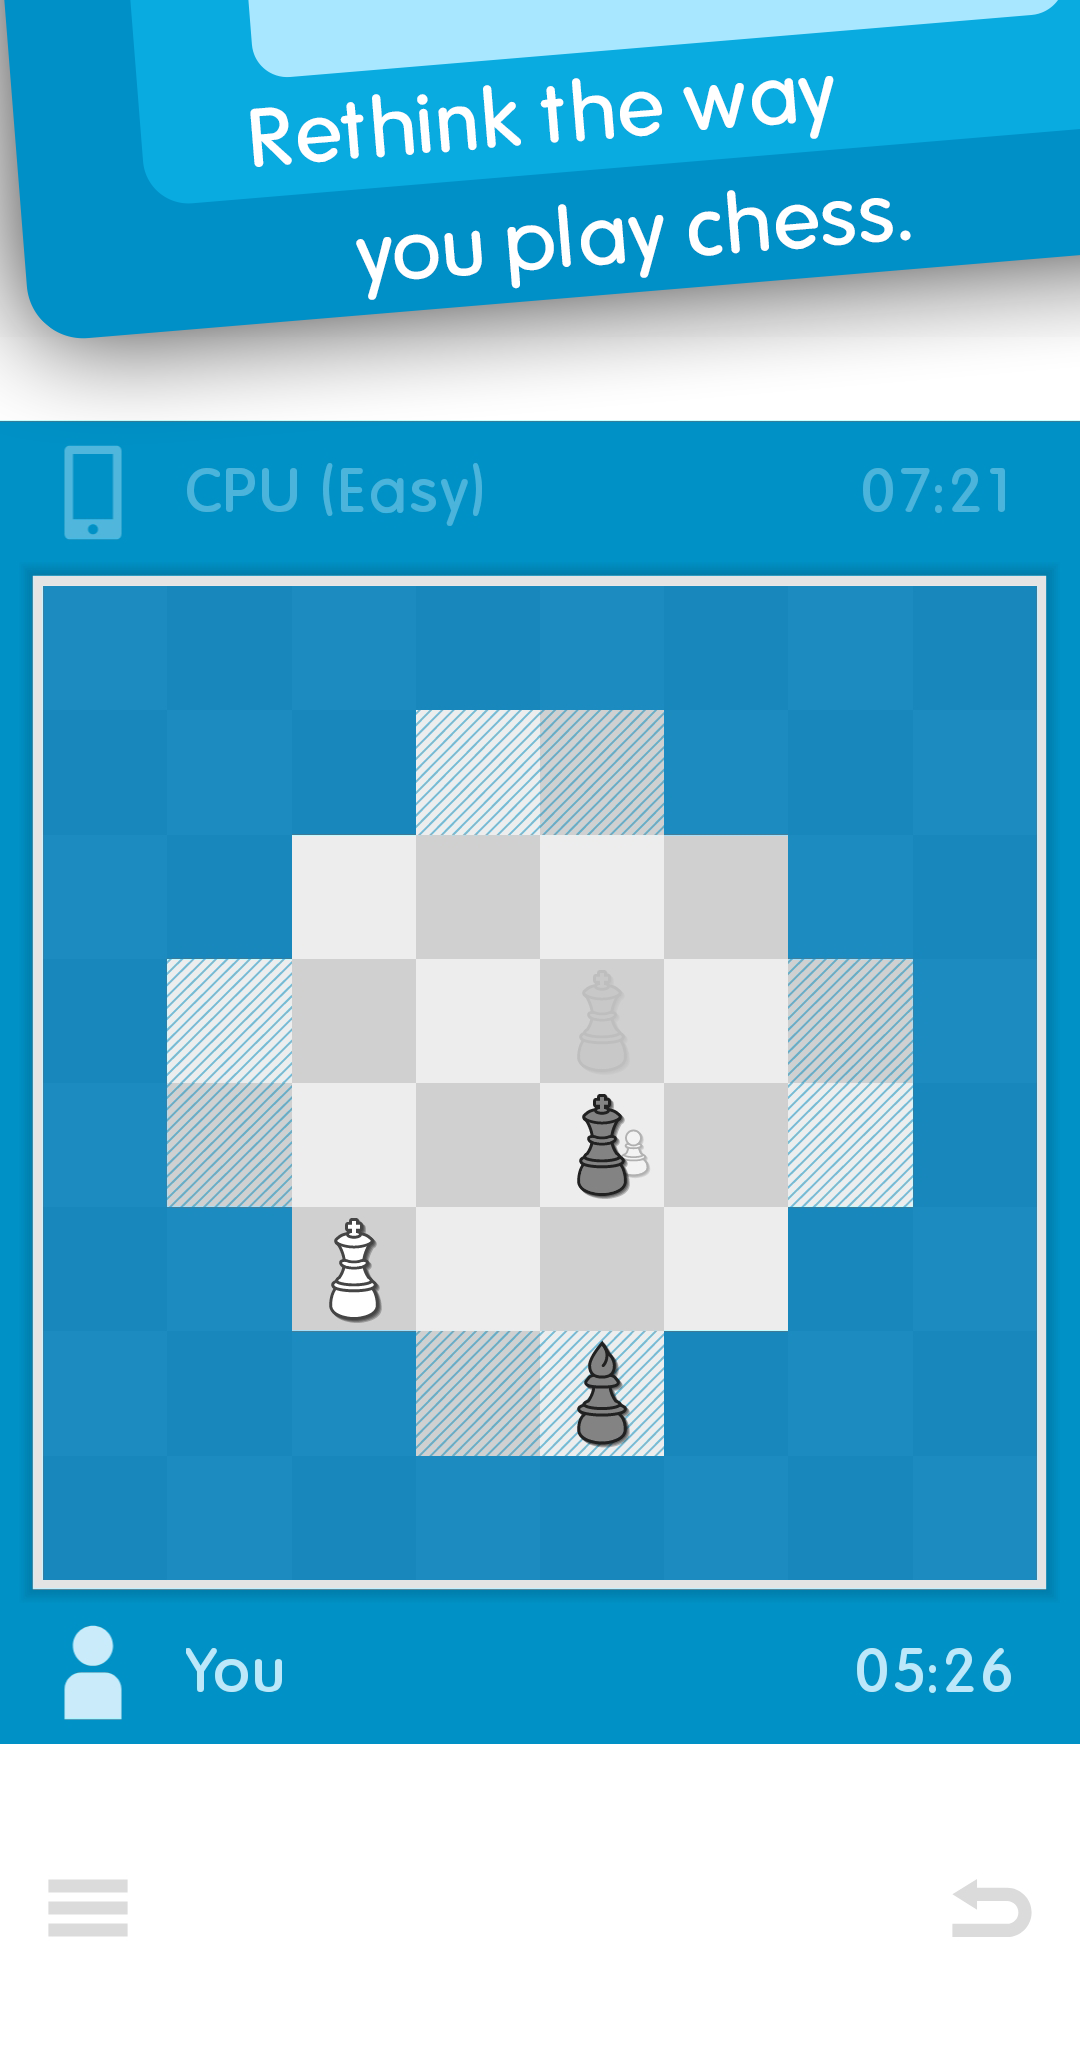 Rethink the way you play chess.